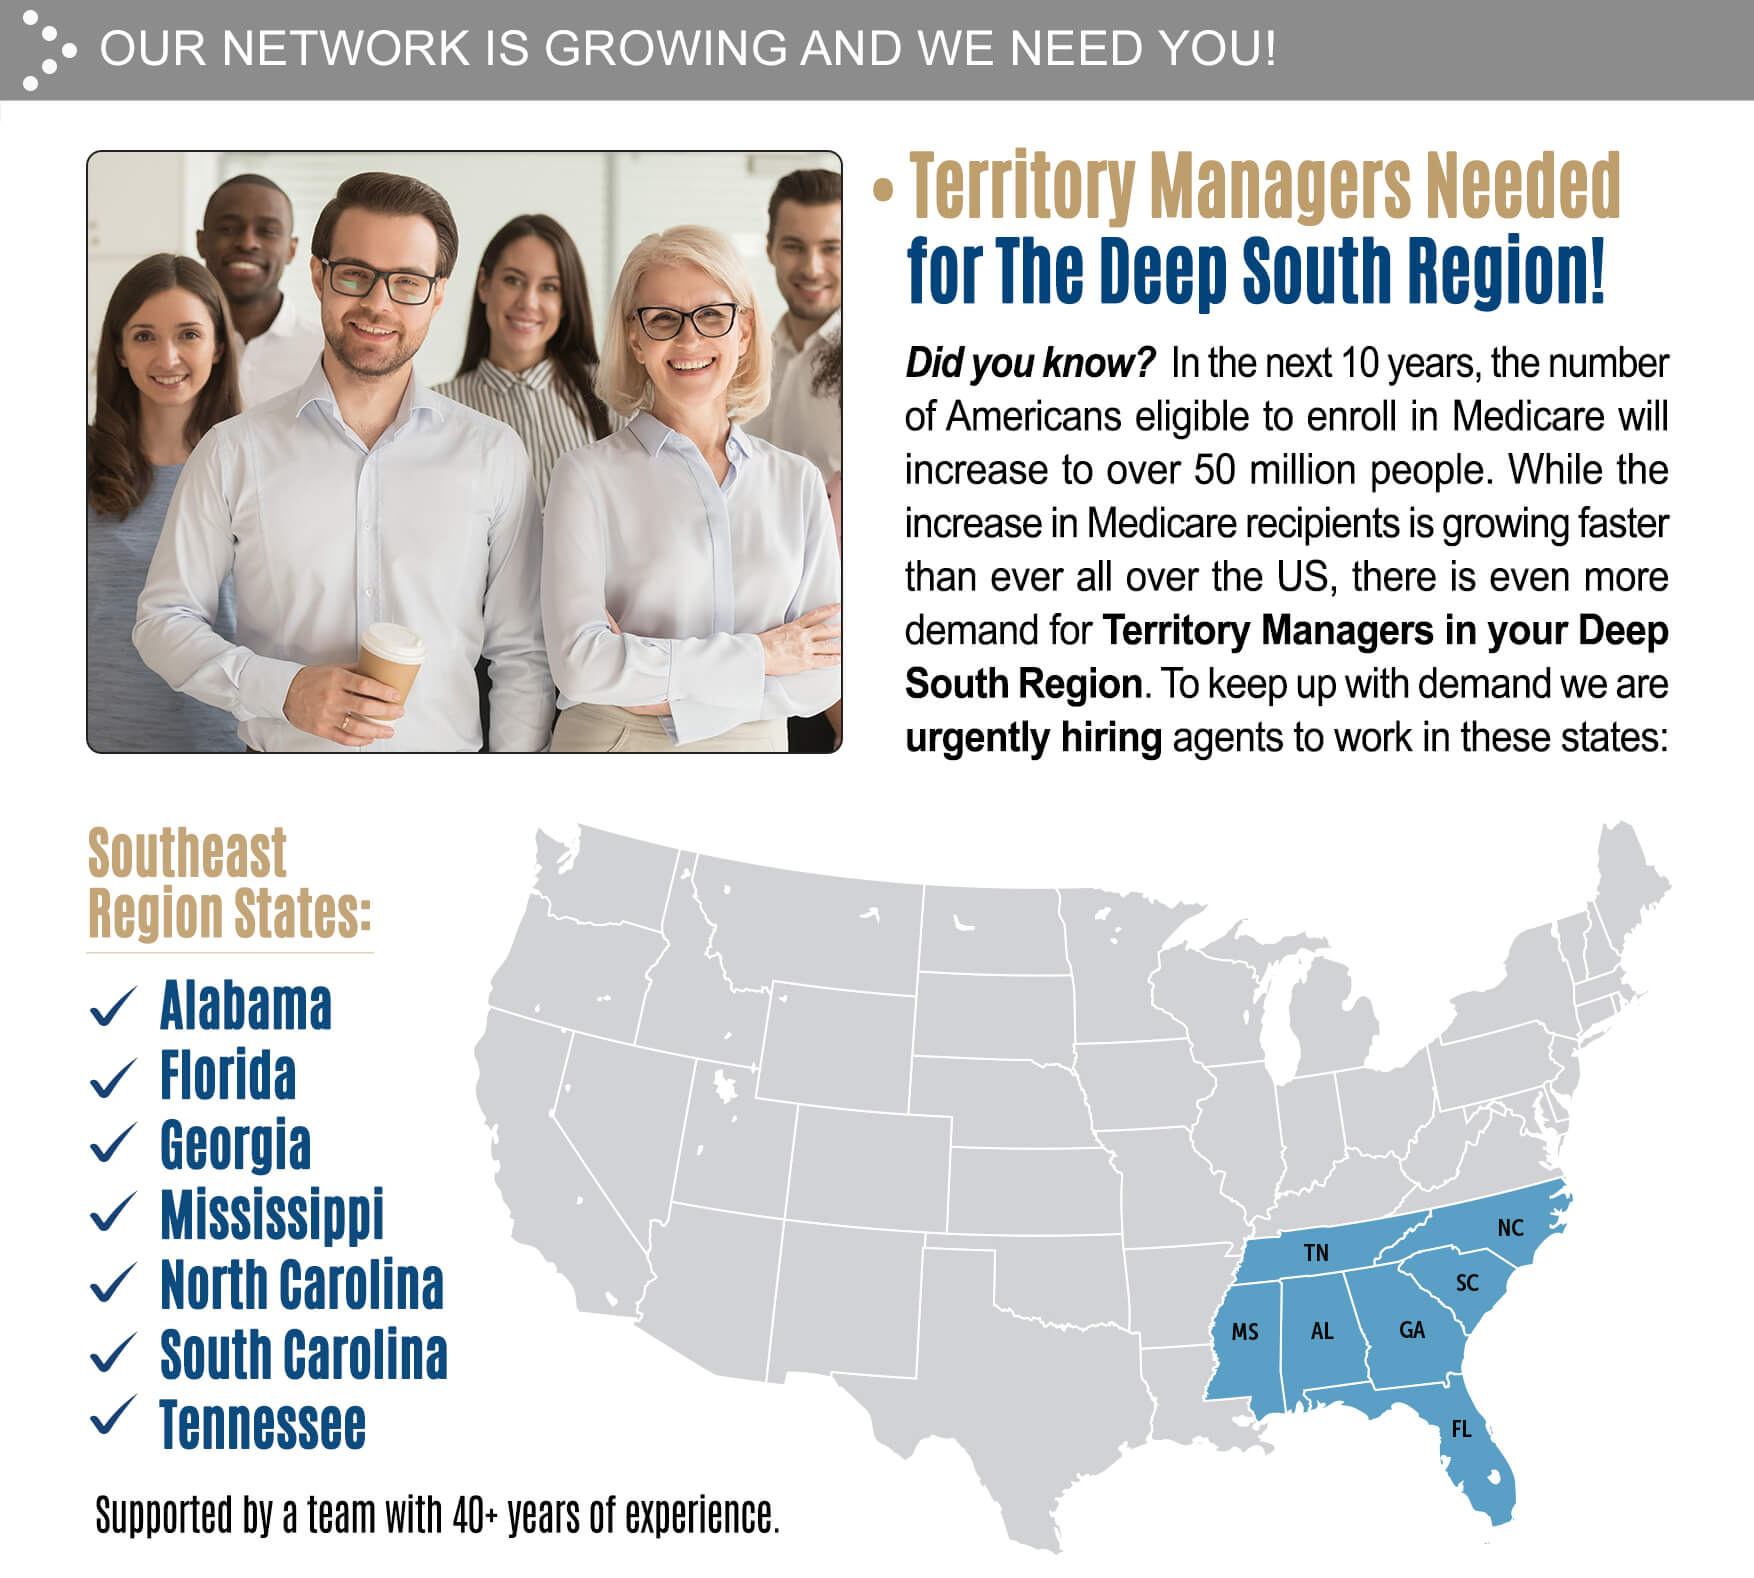 OUR NETWORK IS GROWING AND WE NEED YOU! • Territory Managers Needed for The Deep South Region! Did you know? In the next 10 years, the number of Americans eligible to enroll in Medicare will increase to over 50 million people. While the increase in Medicare recipients is growing faster than ever all over the US, there is even more demand for Territory Managers in your Deep South Region. To keep up with demand we are urgently hiring agents to work in these states: ✓ Alabama,  ✓ Florida, ✓ Georgia, ✓ Mississippi ✓ North Carolina ✓ South Carolina ✓ Tennessee. Supported by a team with 40+ years of experience. 